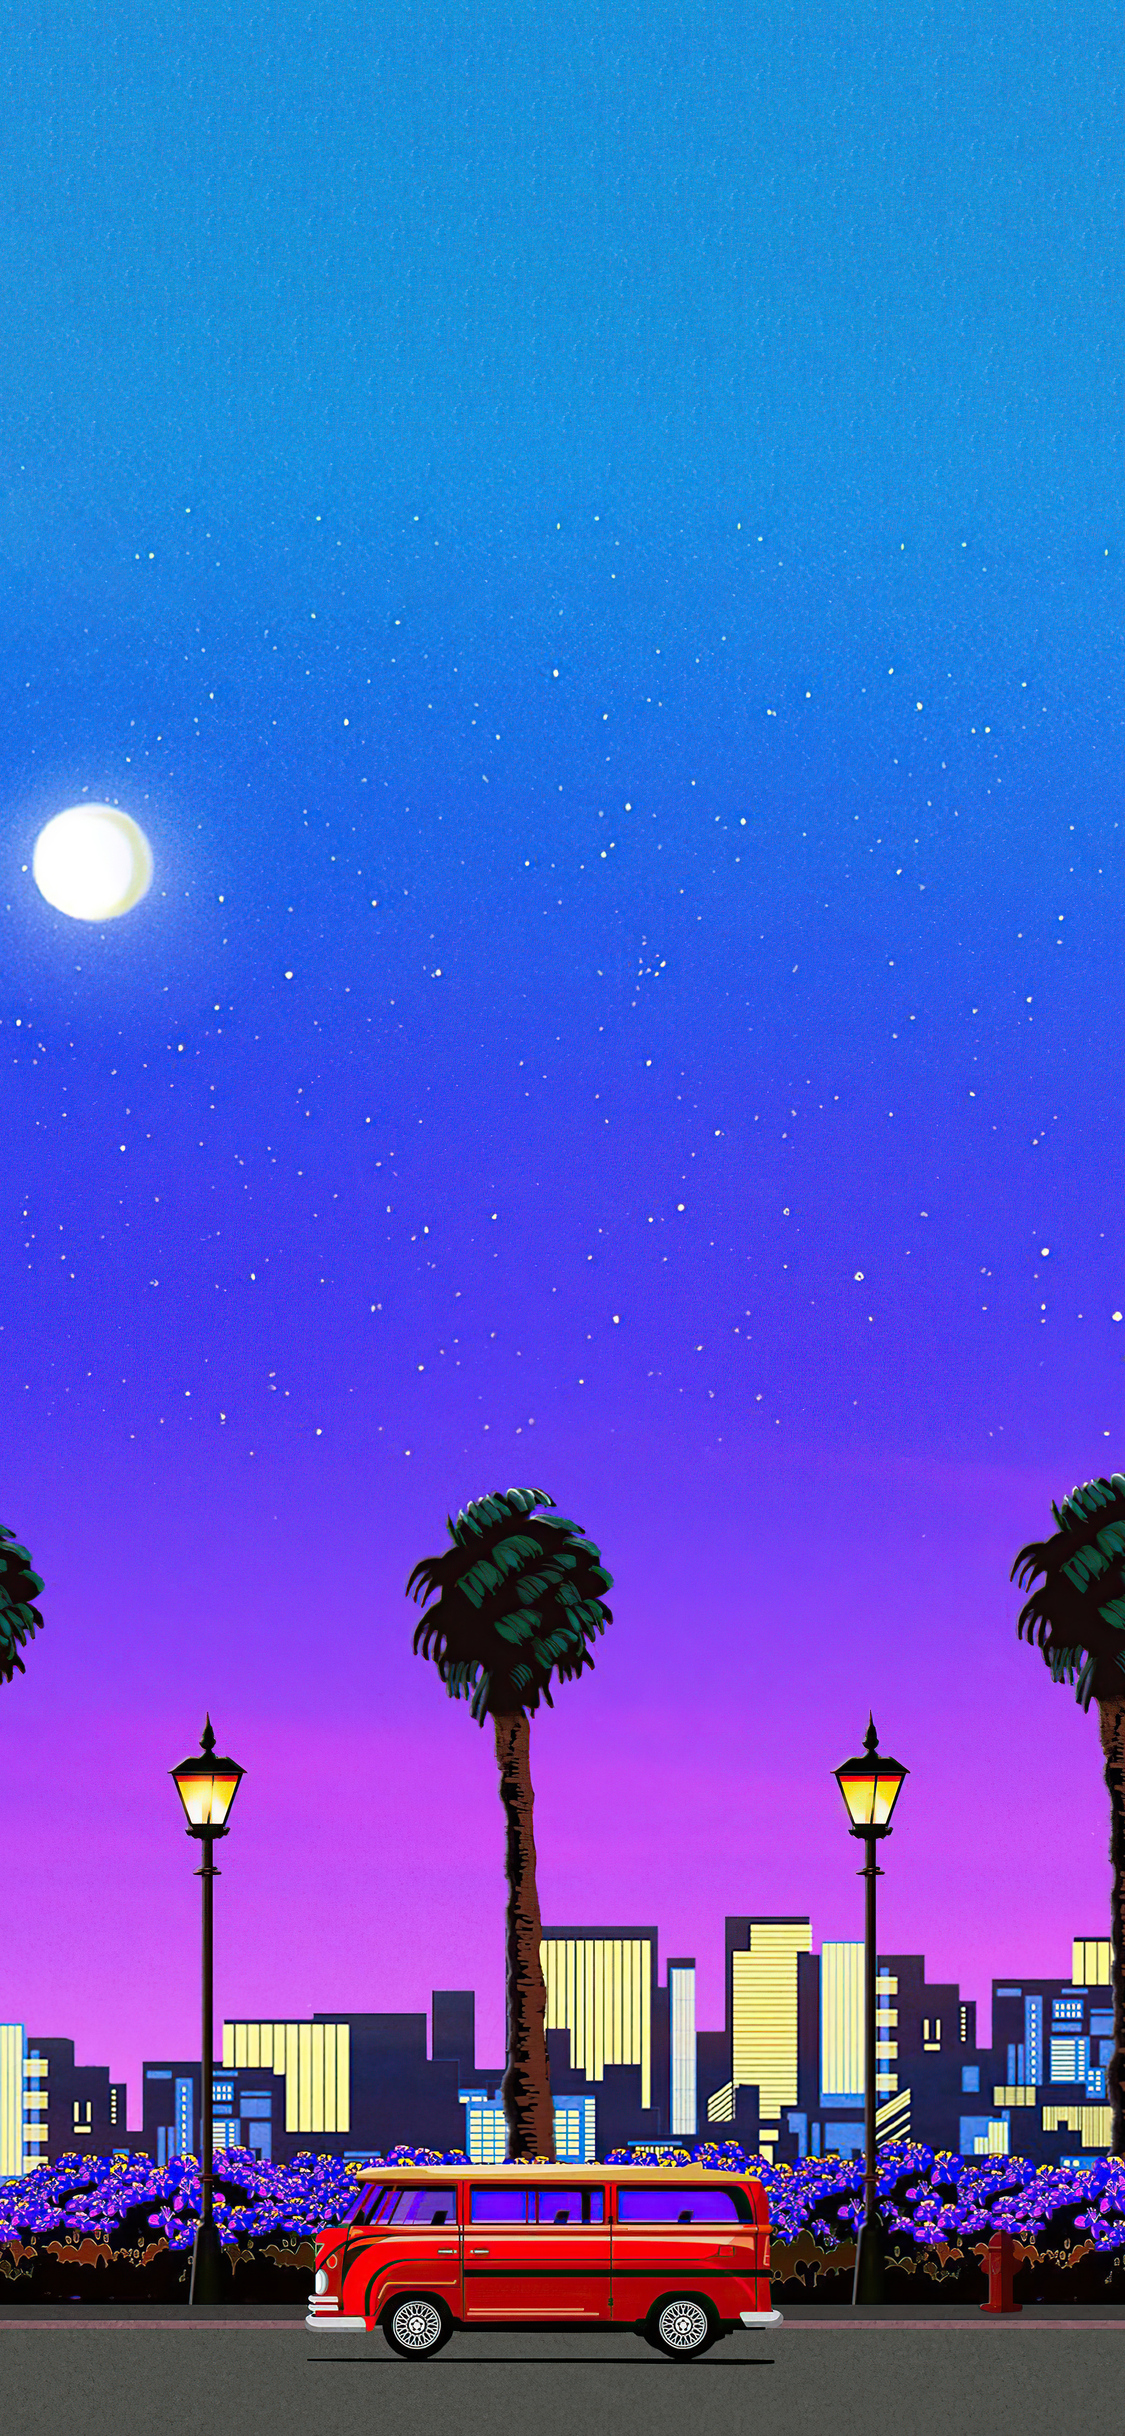 X the midnight sky vaporwave aesthetic iphone xsiphone iphone x hd k wallpapers images backgrounds photos and pictures